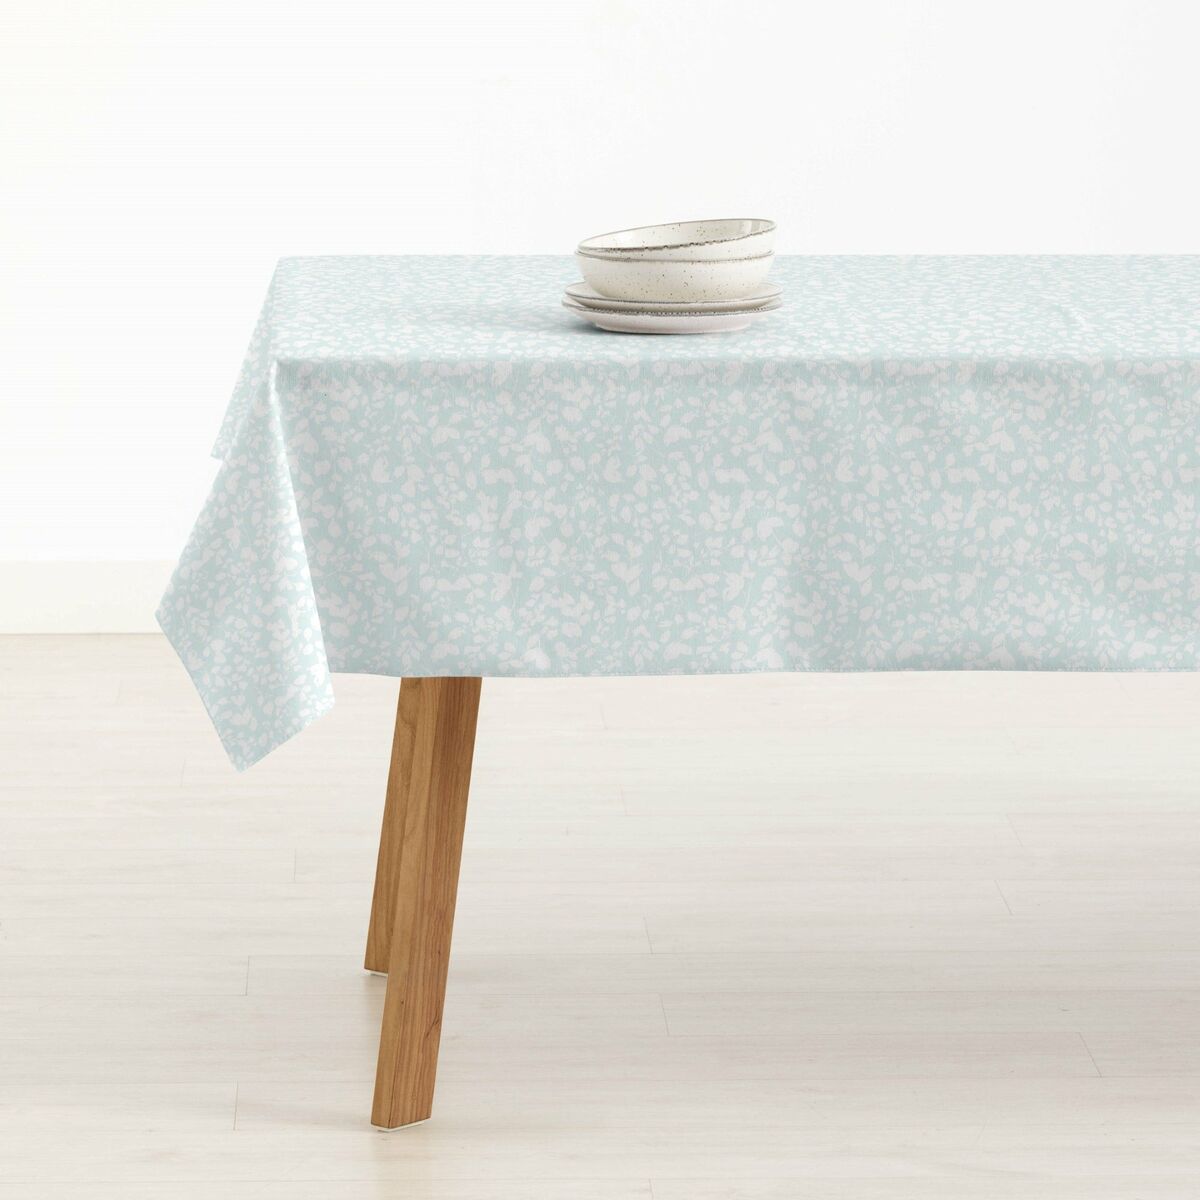 Stain-proof tablecloth Belum 0120-379 250 x 140 cm